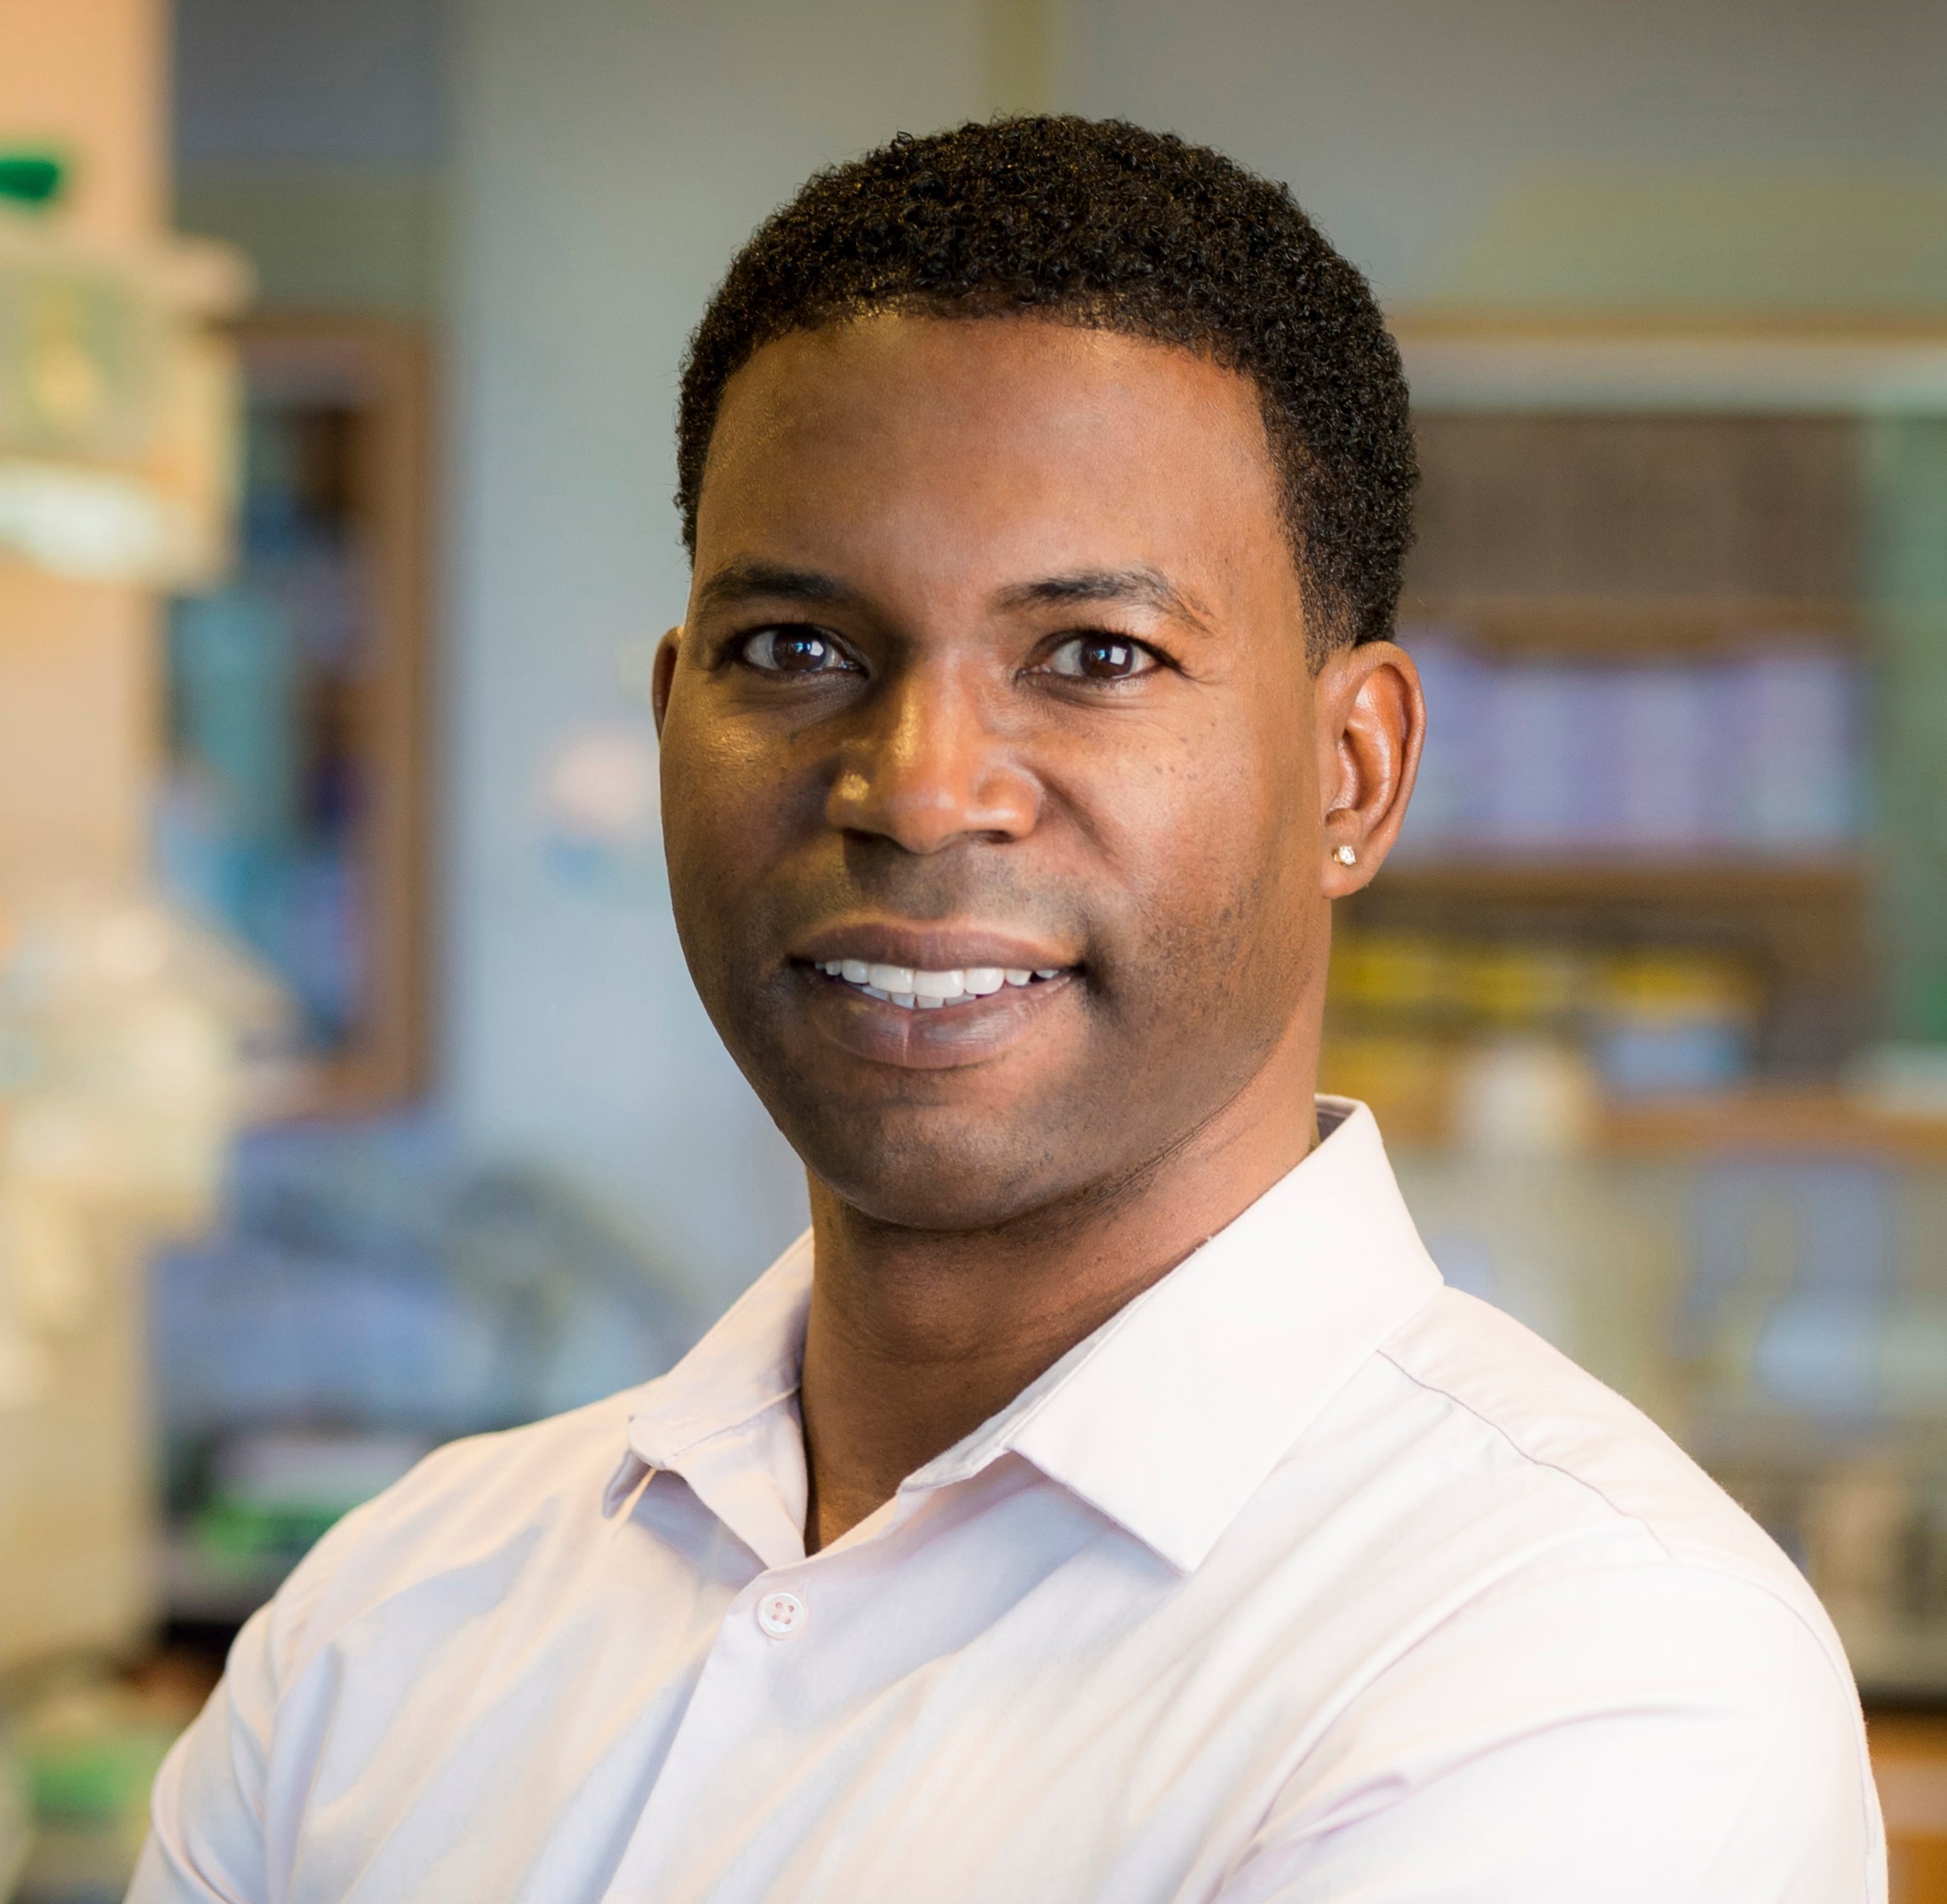 Dr. Gentry Patrick, UCSD